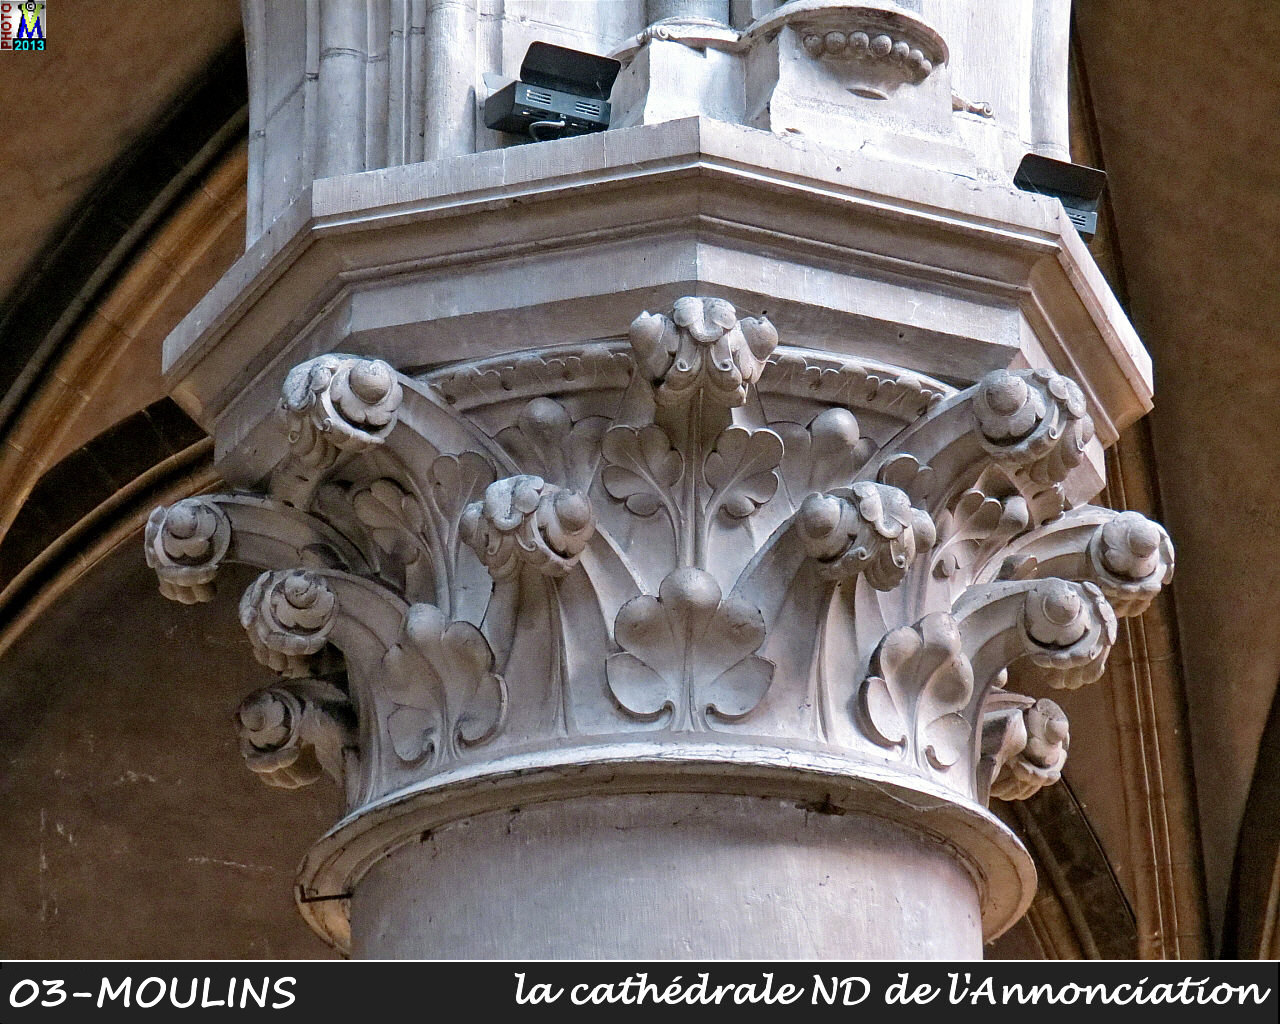 03MOULINS_cathedrale_212.jpg